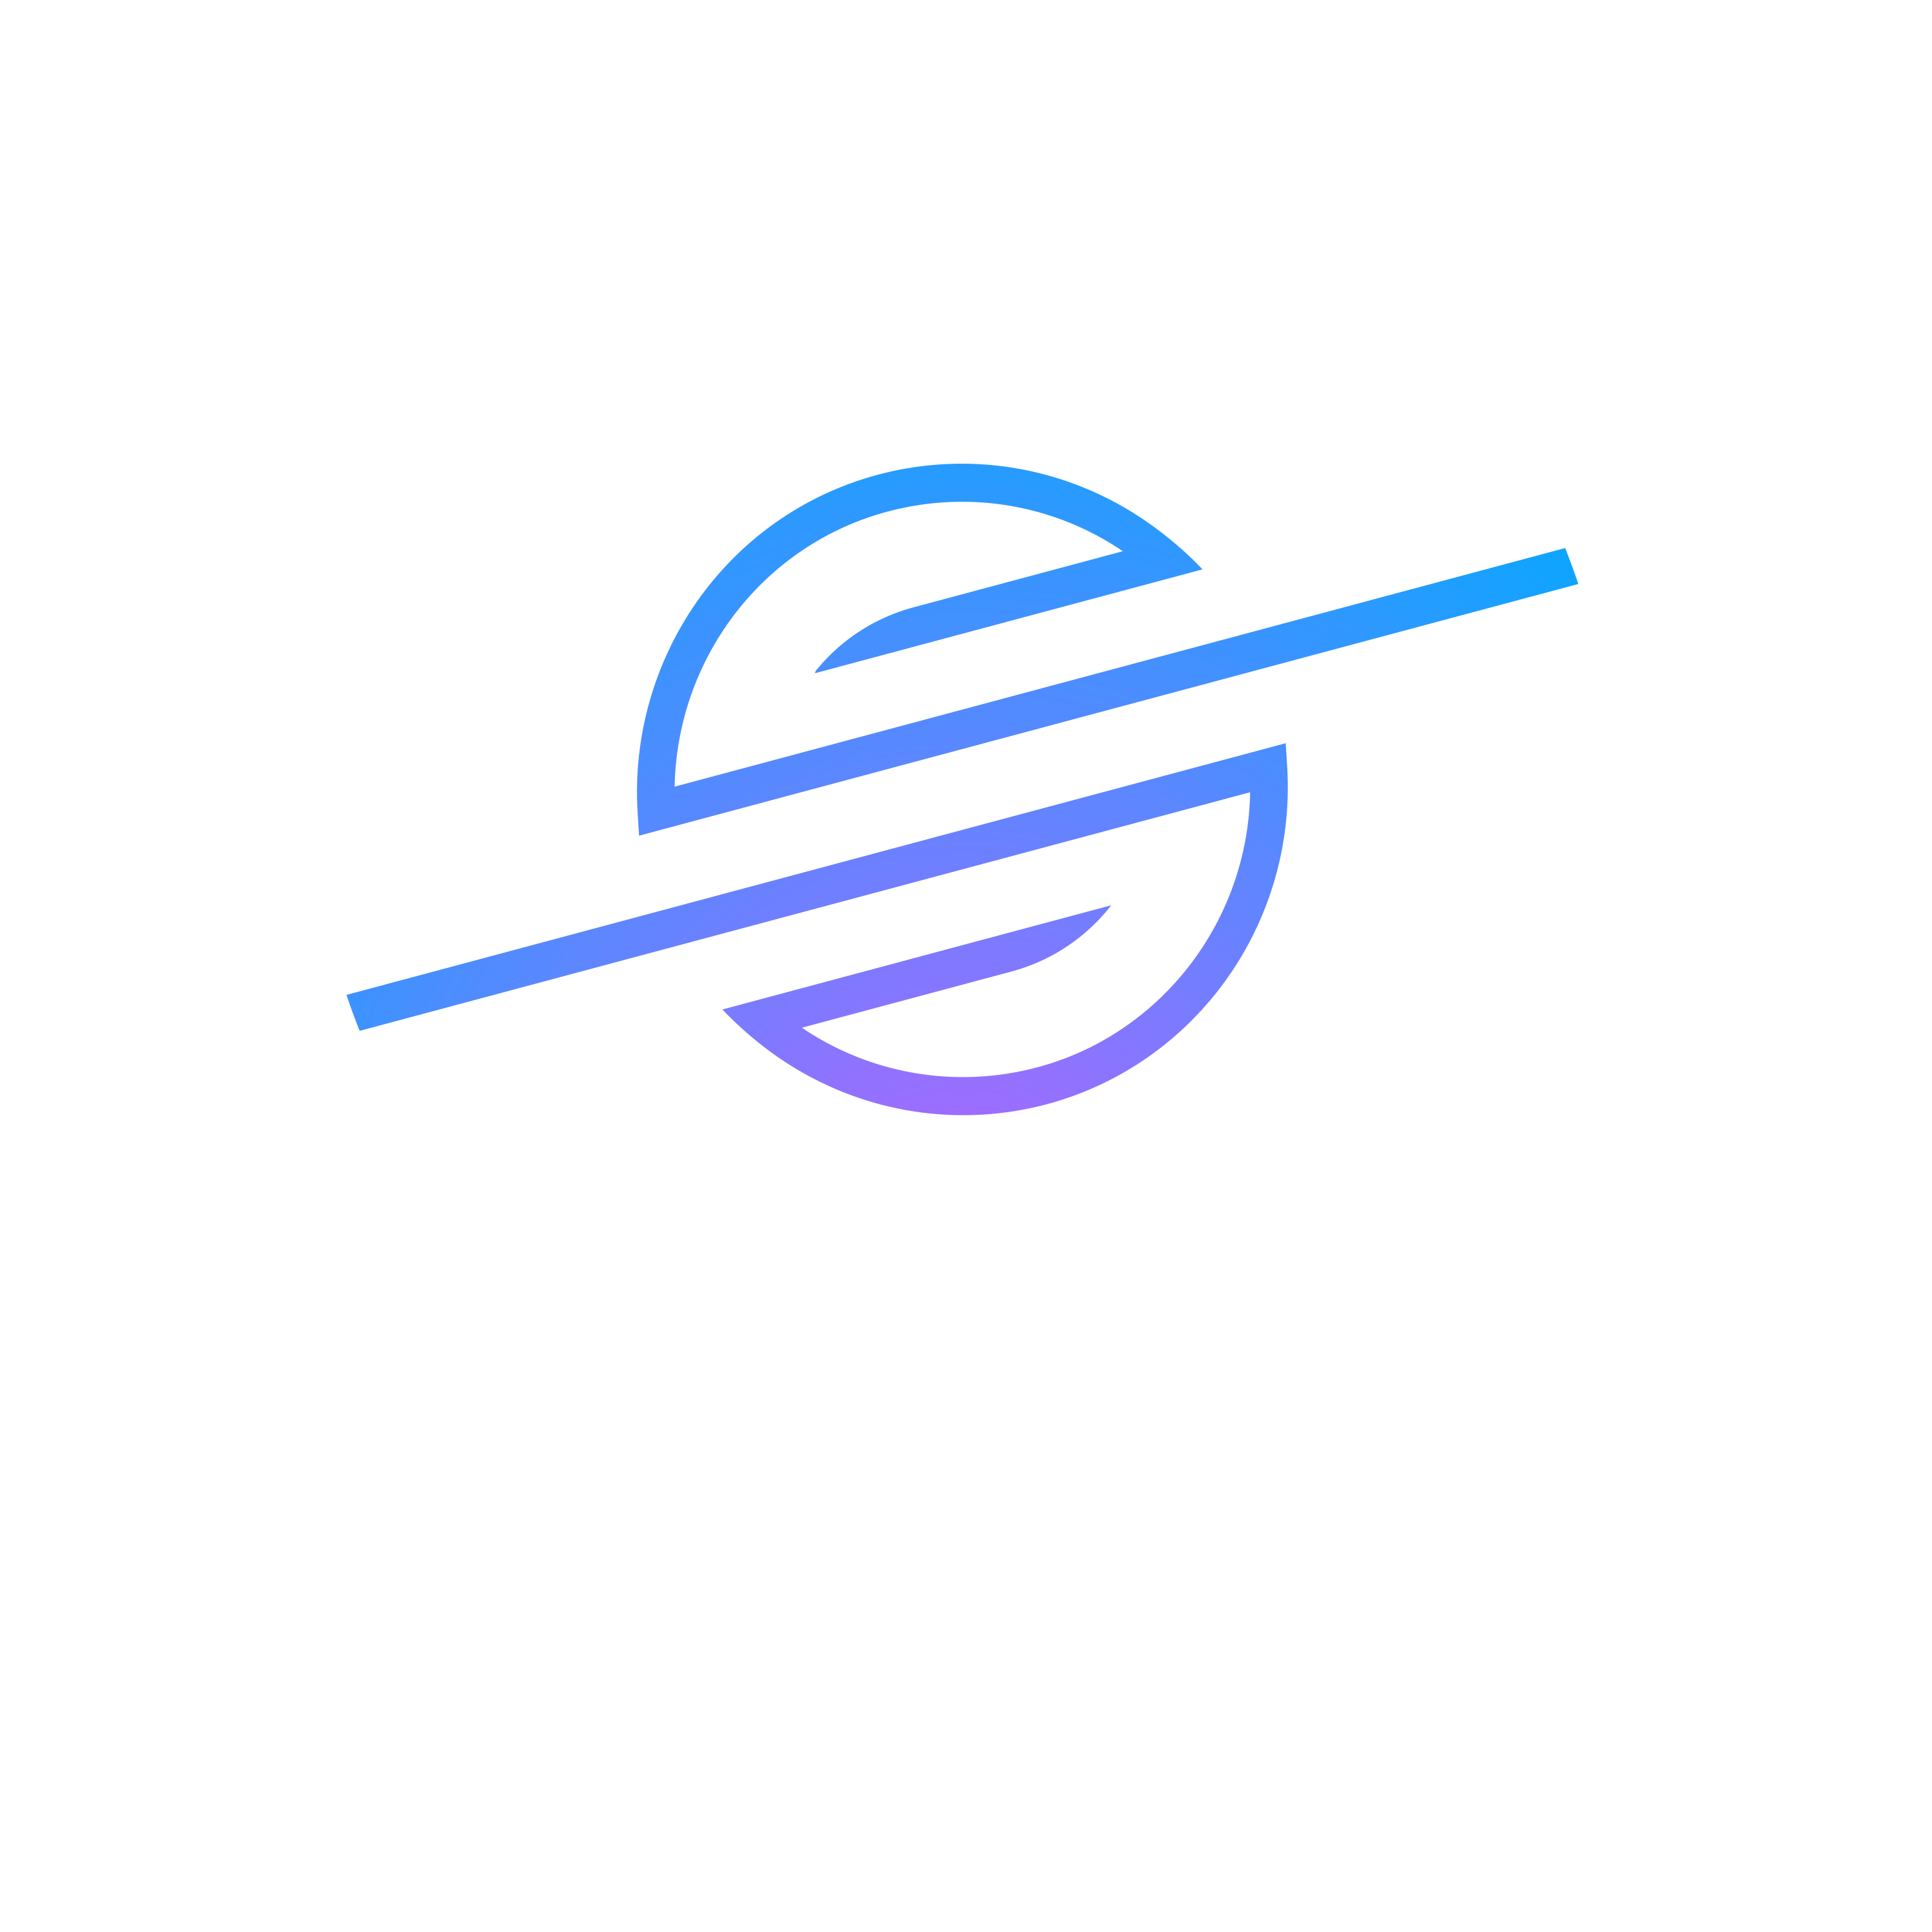 Enliven Systems